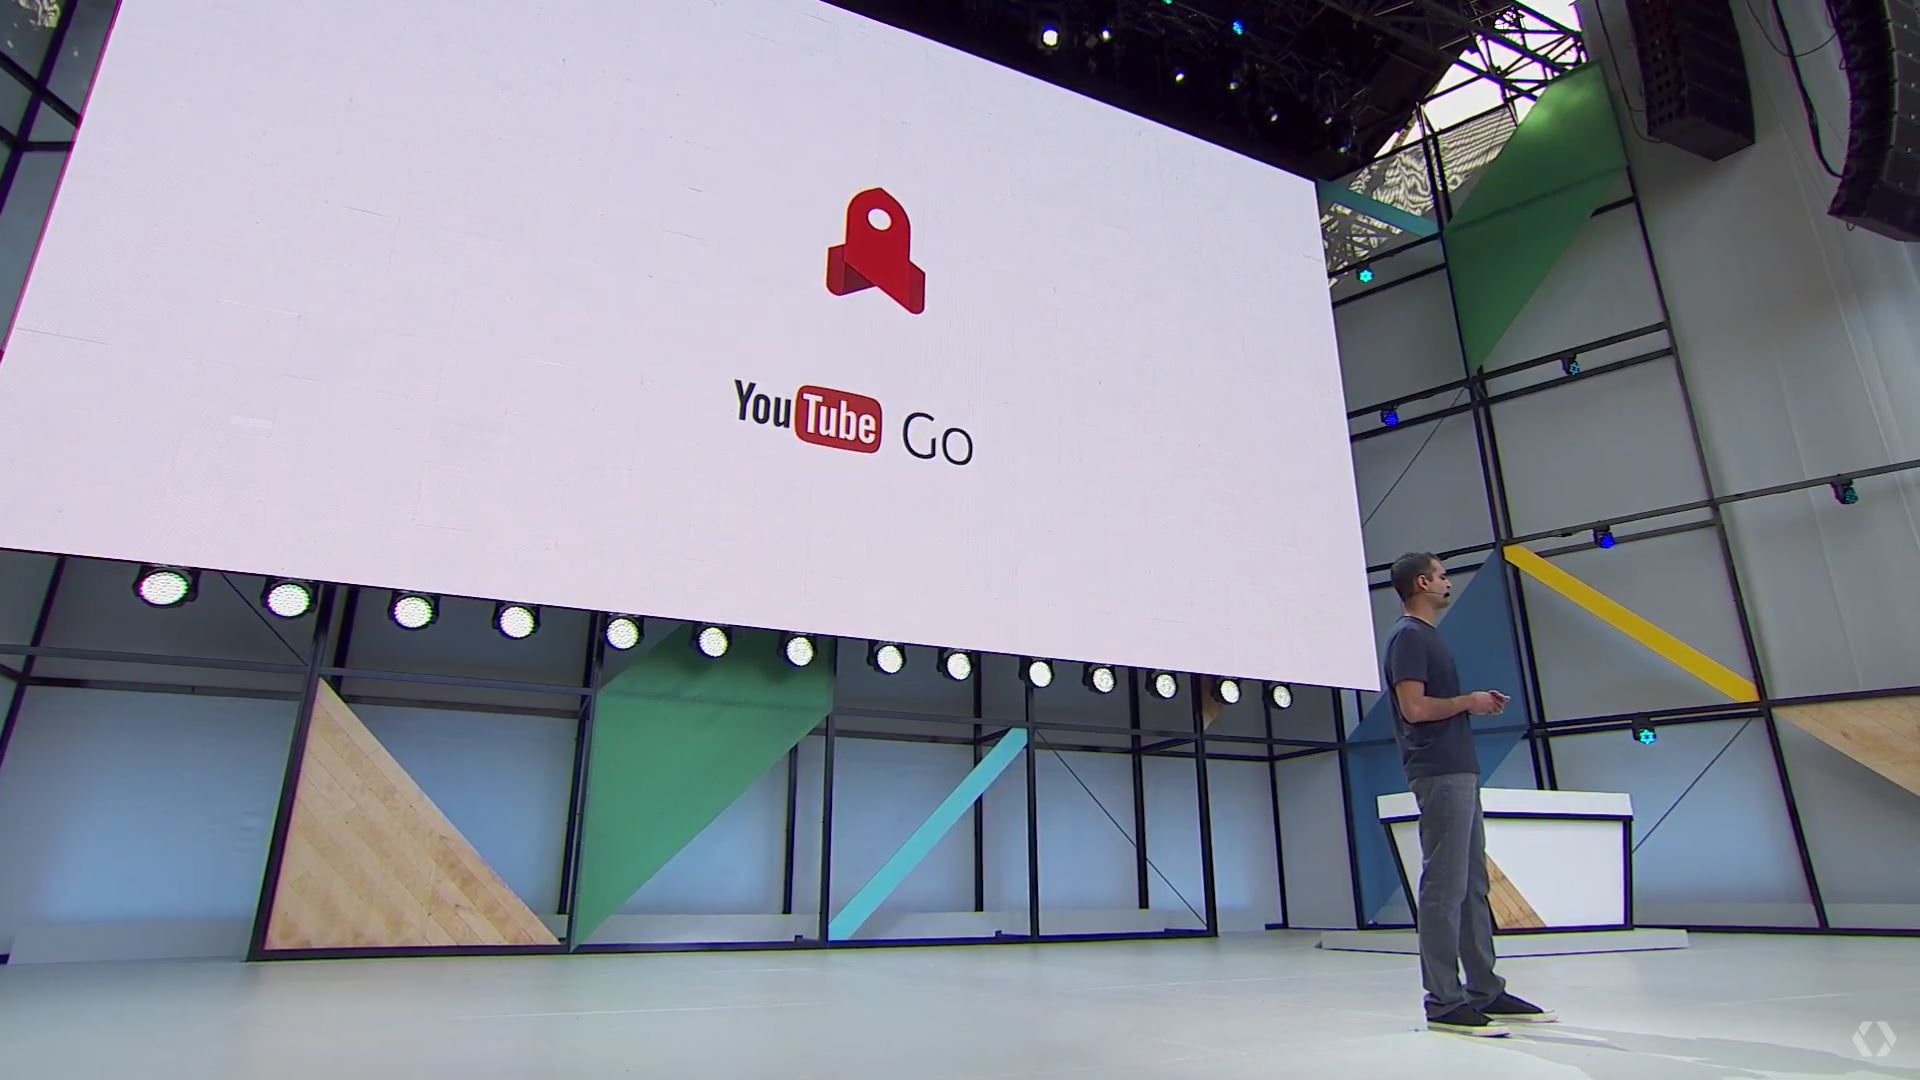 YouTube Go? More like YouTube Stop as lightweight app will be killed off